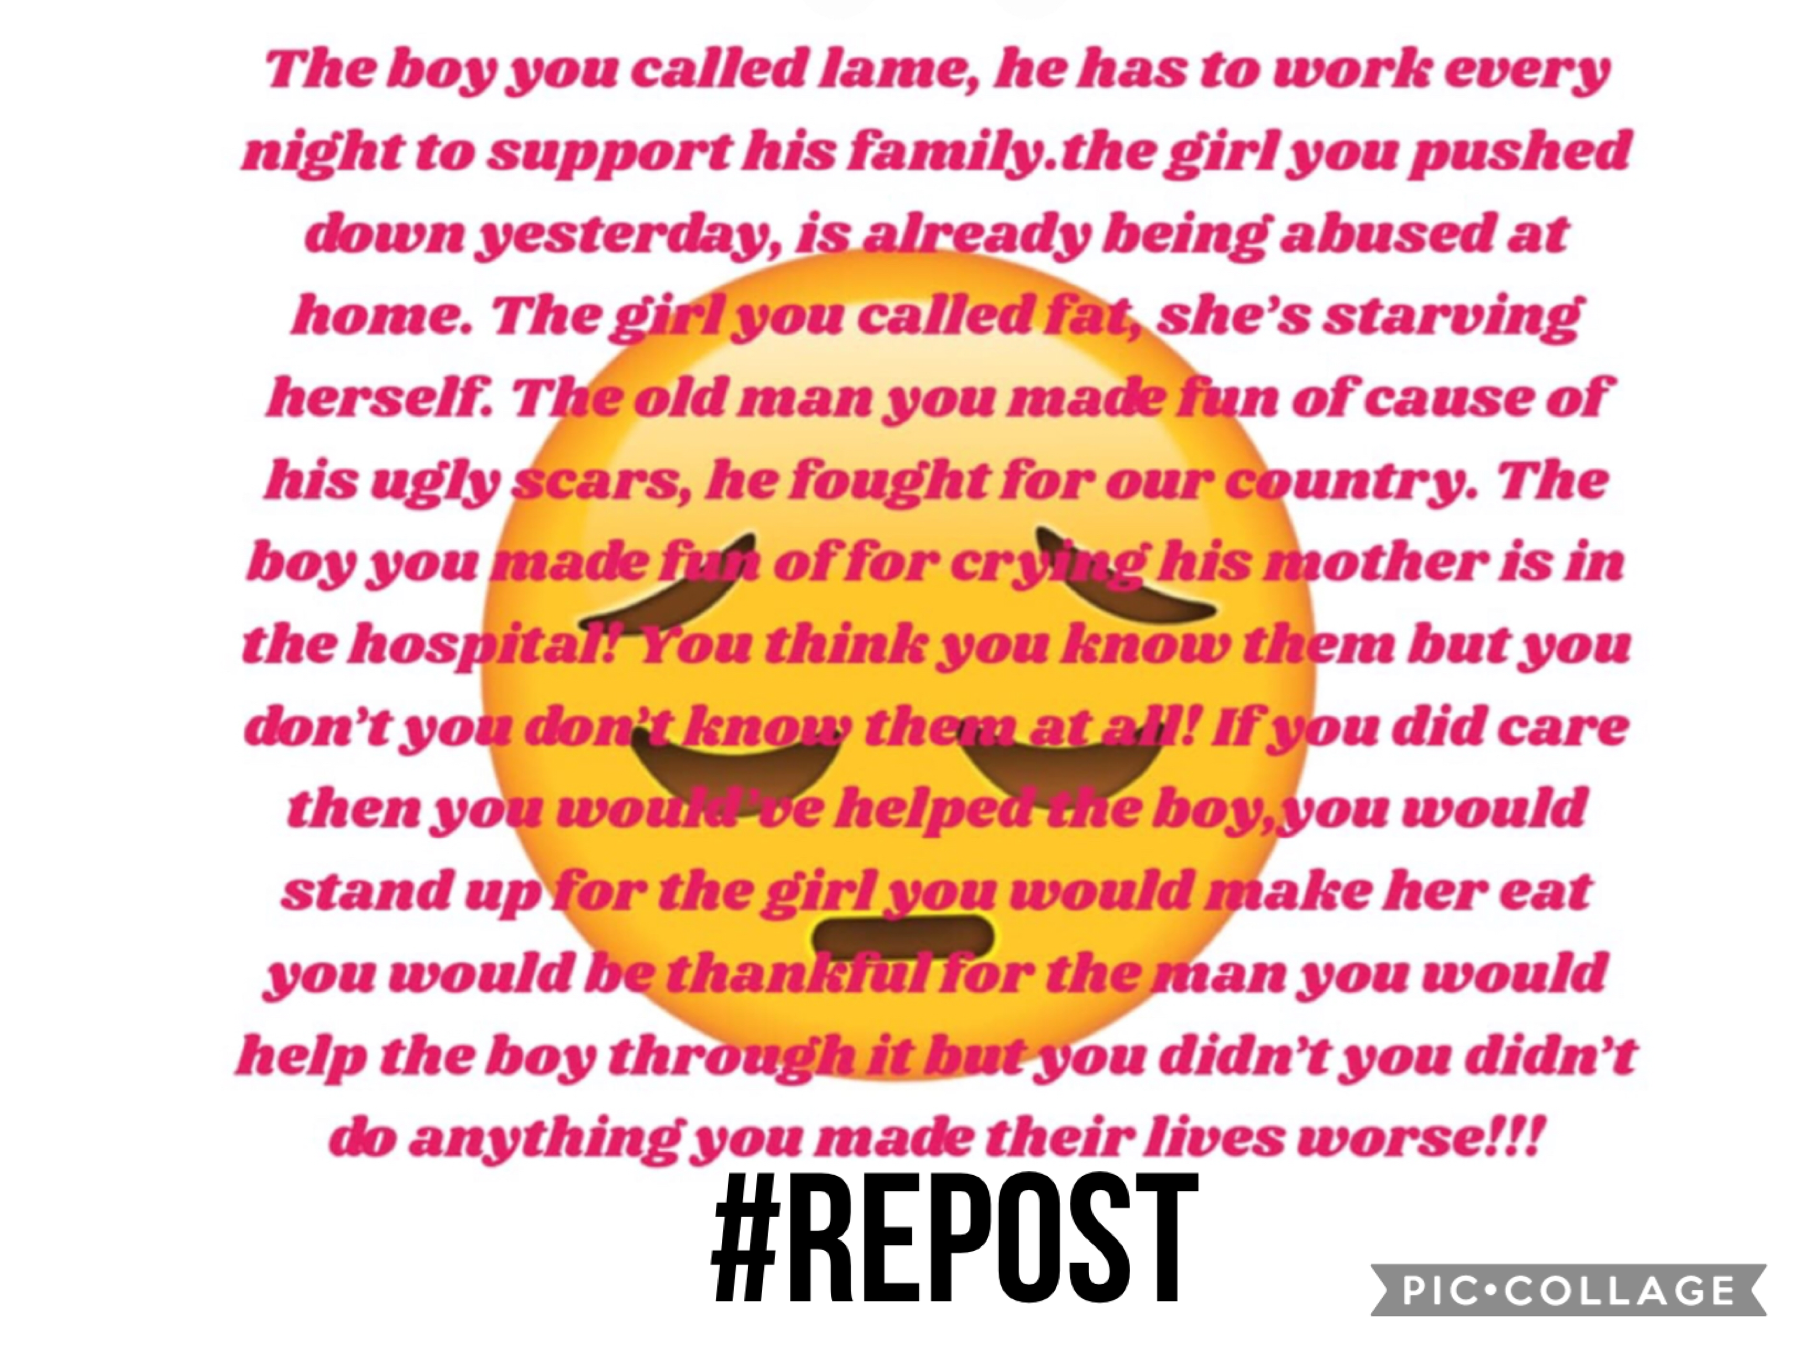 This is a repost can’t remember who started it but this has been spreading throughout PicCollage and I thought it would help raise awareness about being careful about what you say and how people might already being started so I thought I would post it too